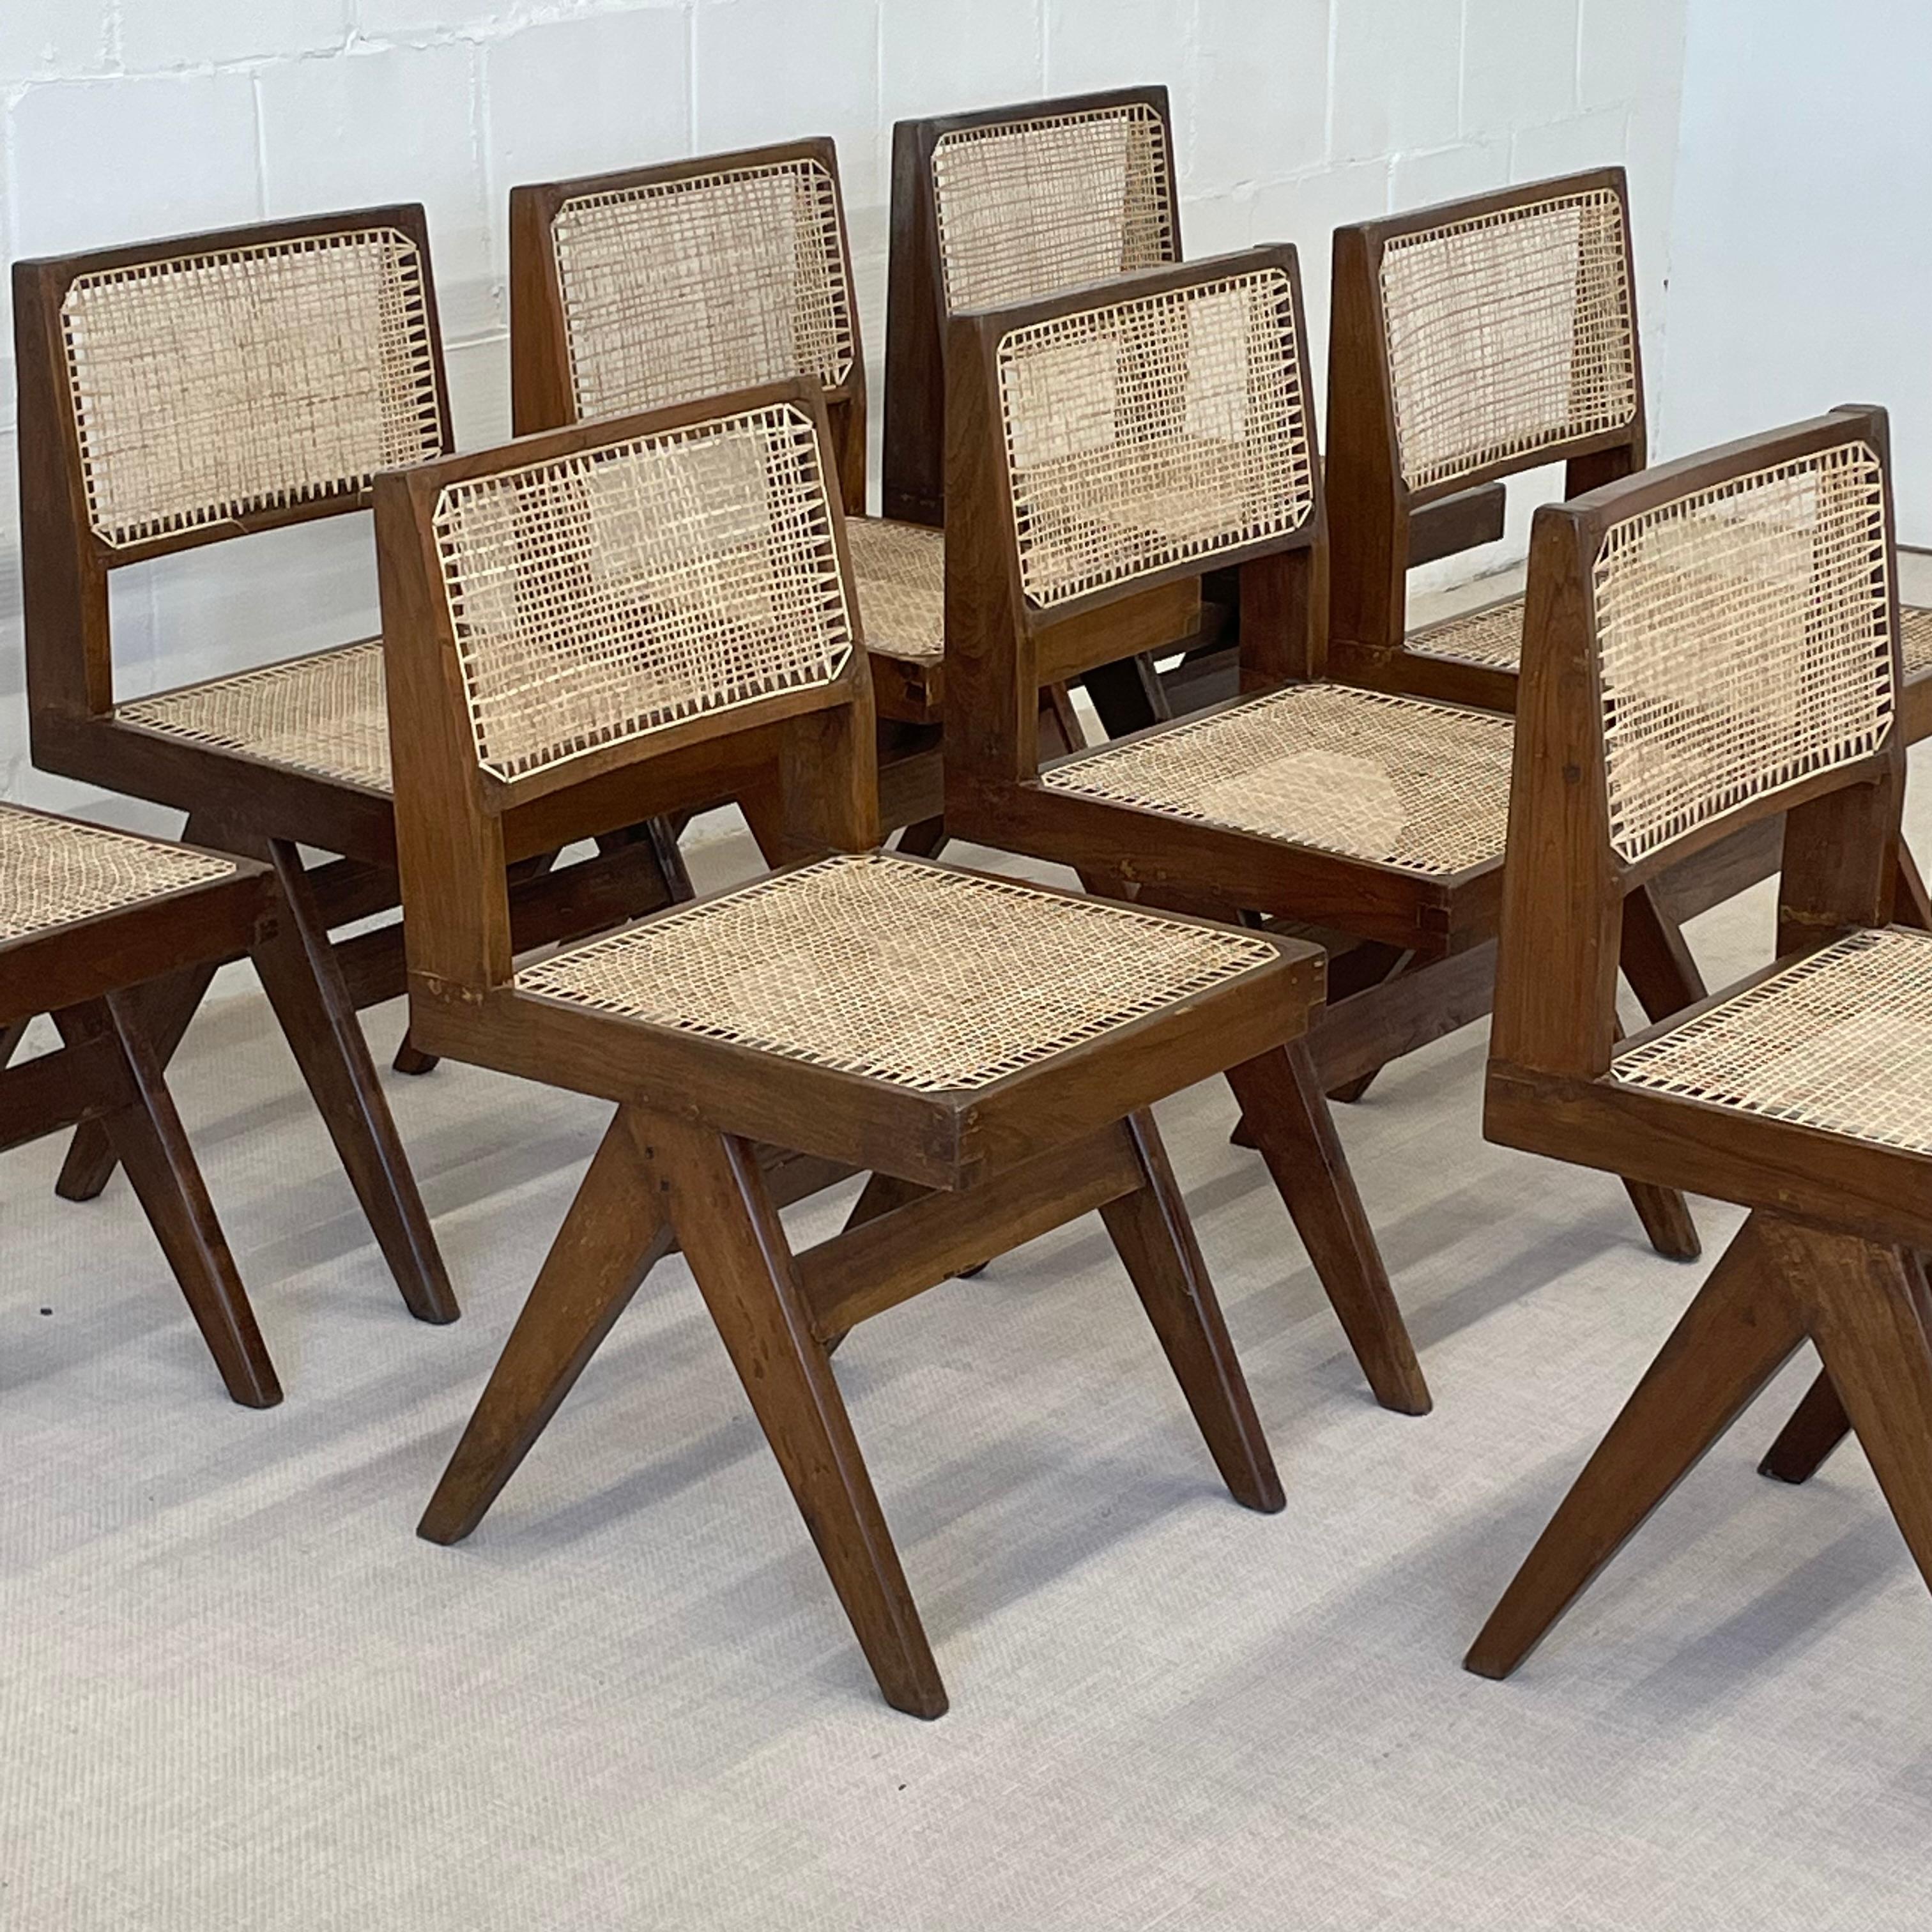 Mid-Century Modern 10 Pierre Jeanneret Armless Dining Chairs, Teak, Cane, France/India